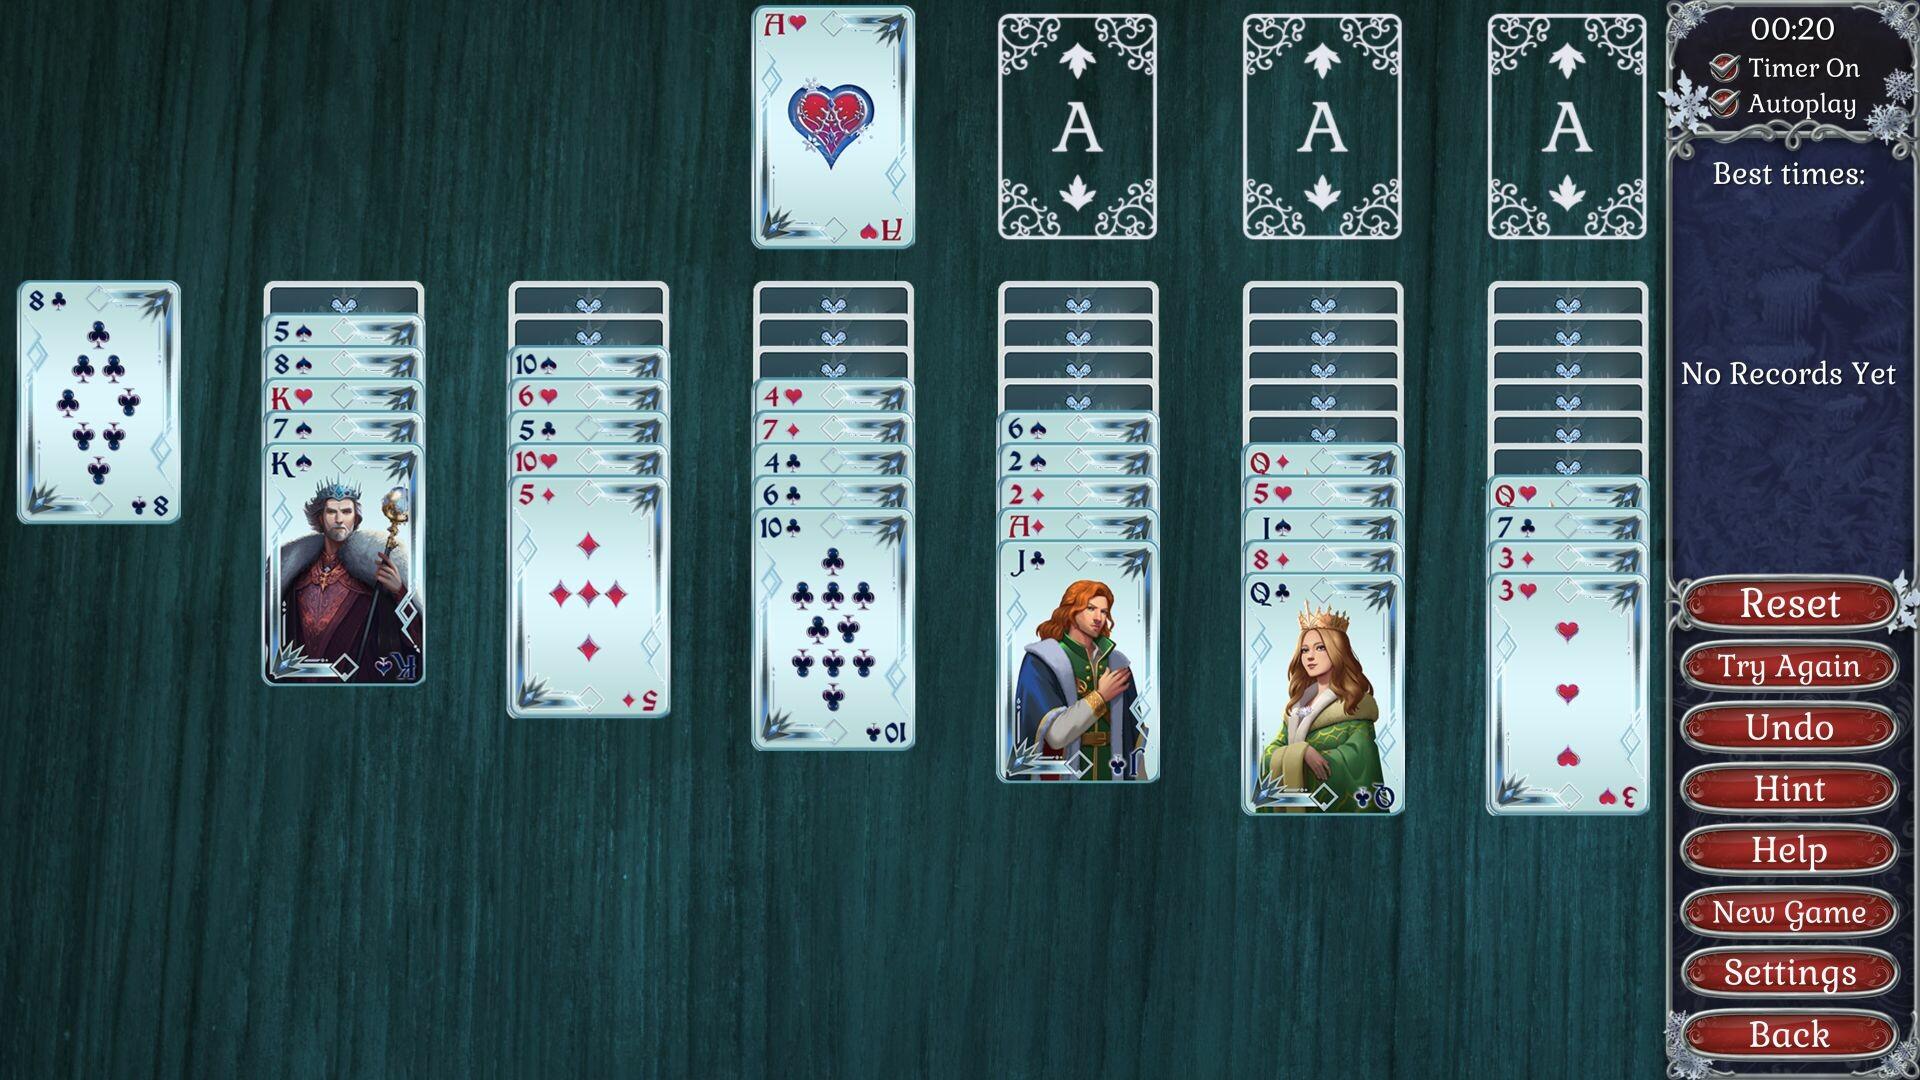 Screenshot of Jewel Match Solitaire Winterscapes 2 - Collector's Edition